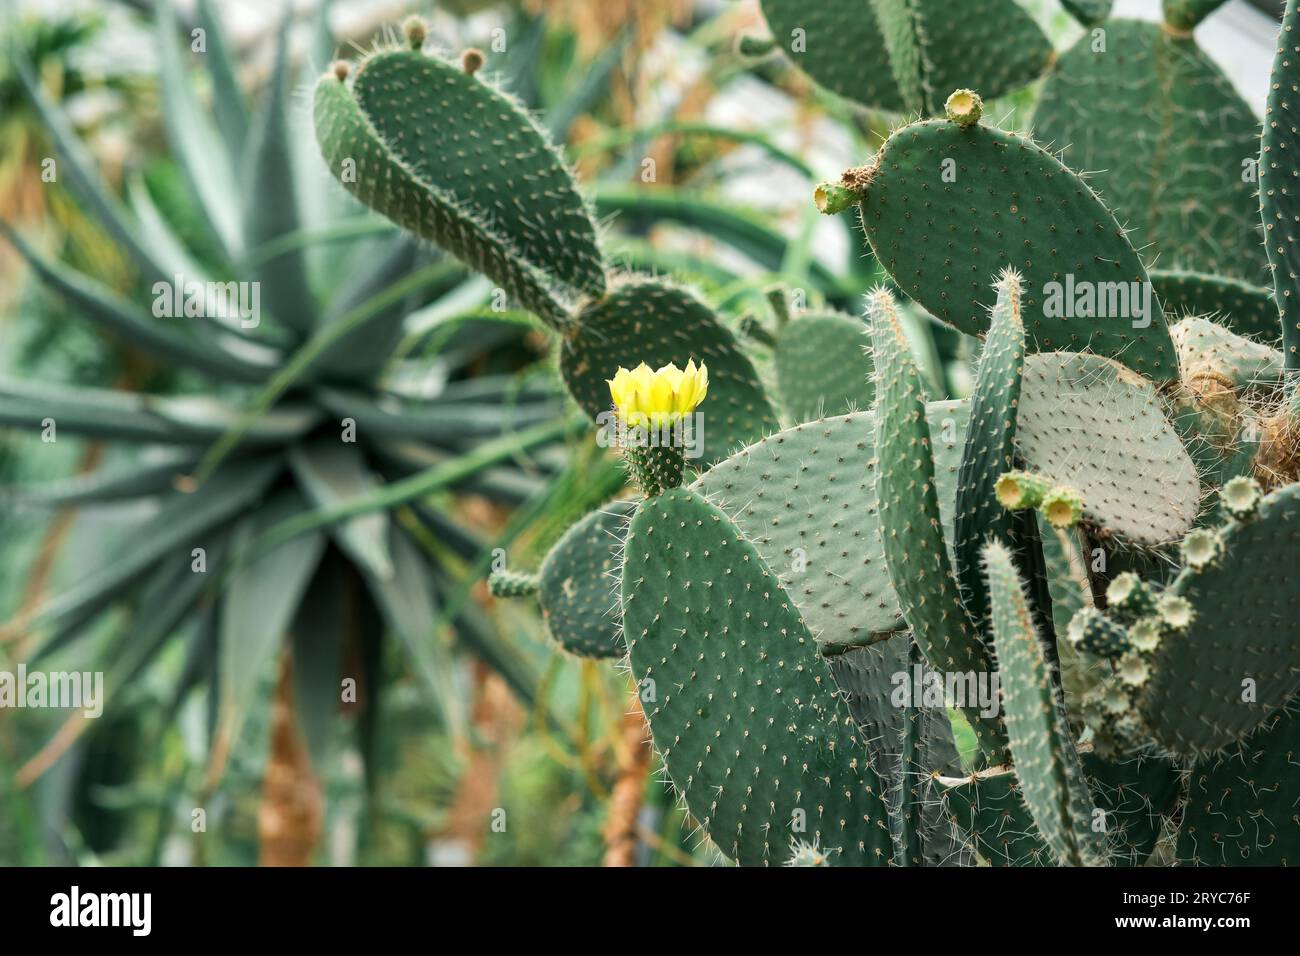 prickly pear cactus leaves with yellow flowers and unripe fruits Stock Photo